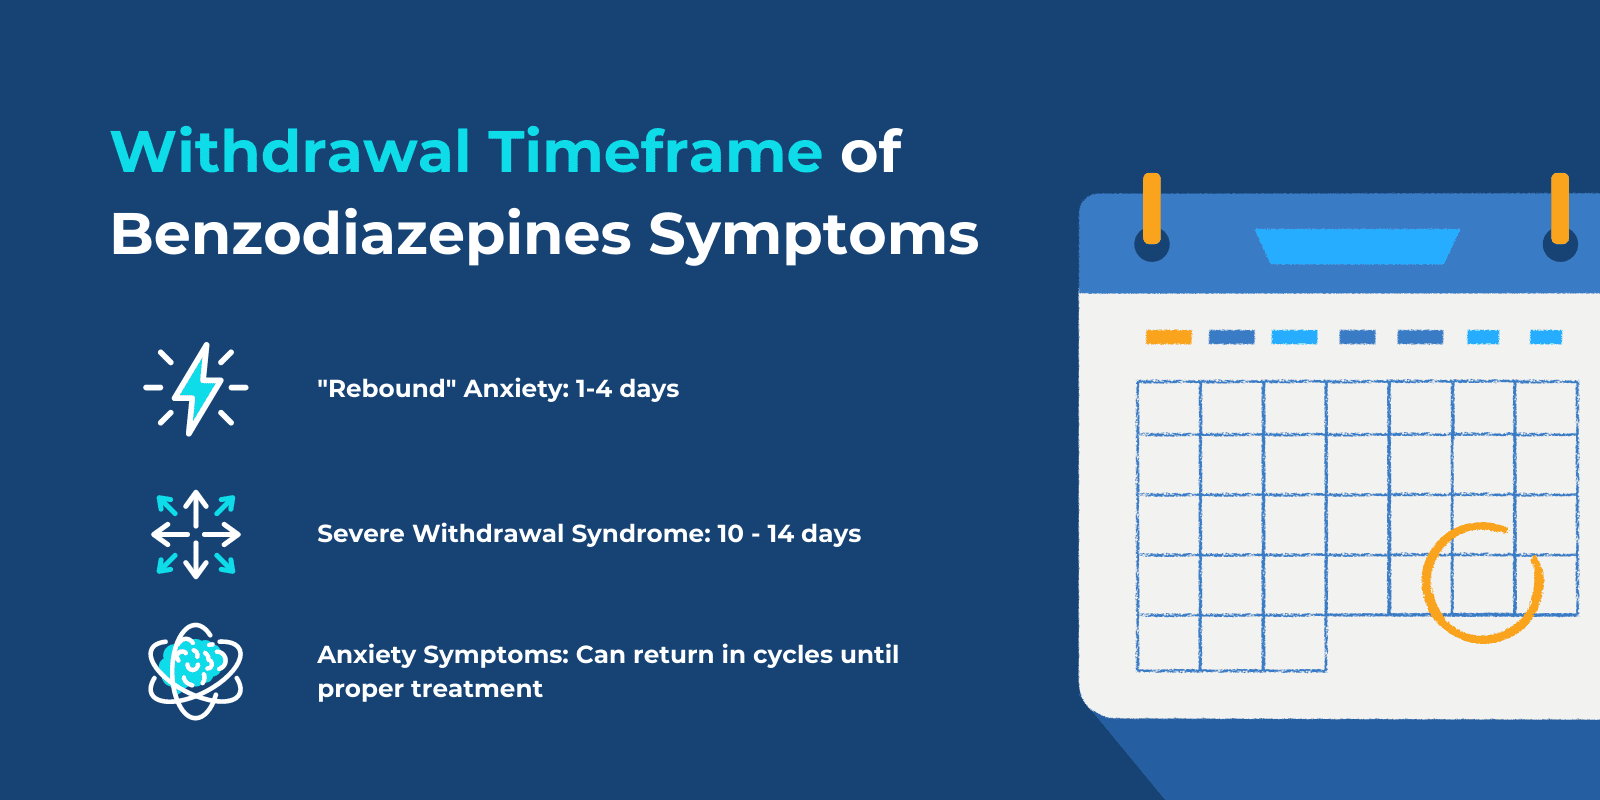 Withdrawal timeframe of benzodiazepines symptoms illustrated with relevant icons next to a calendar illustration